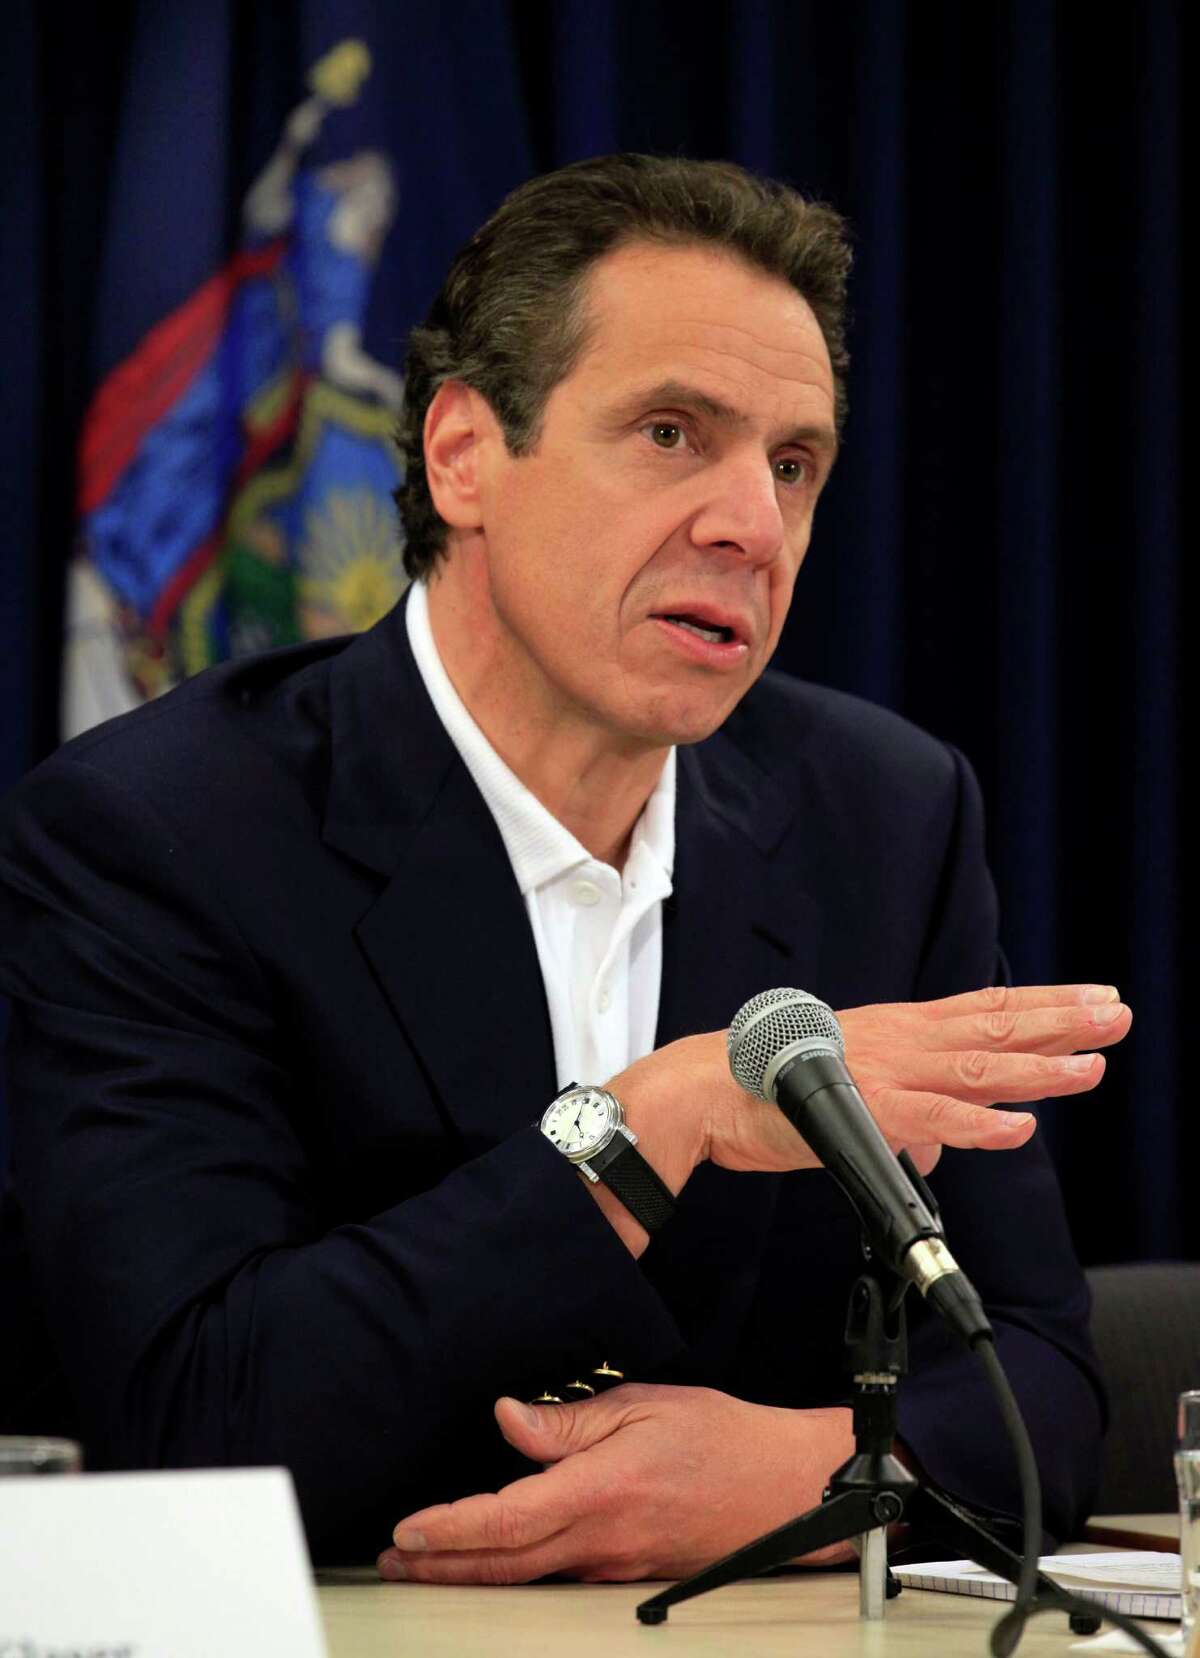 Andrew Cuomo Current job: New York governor Chatter: A former New York attorney general and son of legendary Empire State politician Mario Cuomo, Andrew Cuomo was touted as a possible presidential candidate in 2016 but opted not to run.